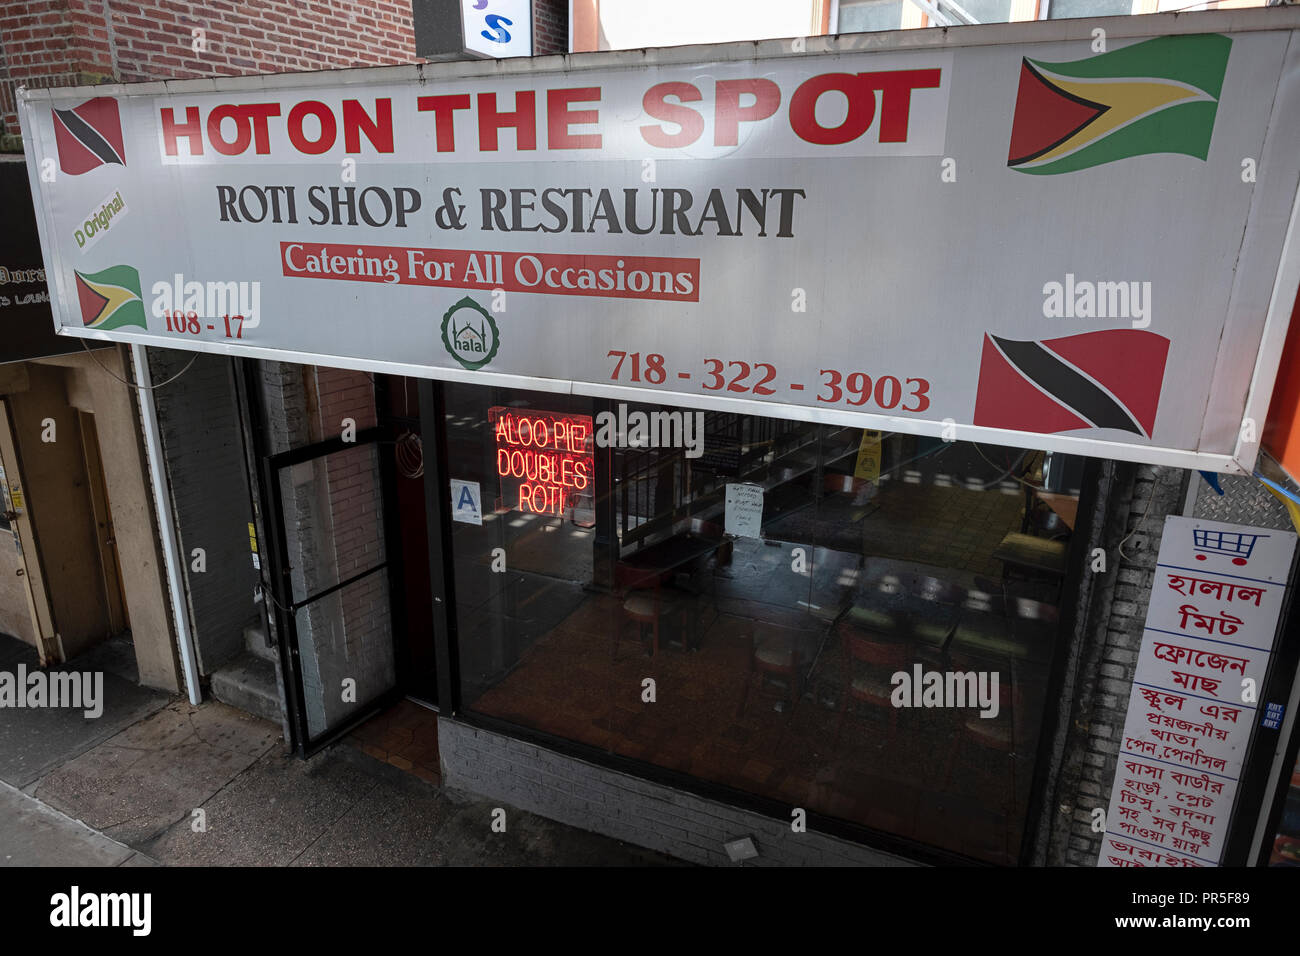 The exterior of HOT ON THE SPOT Roti Shop & Restaurant  on Liberty Ave. in South Richmond Hill, Queens, New York City. Stock Photo